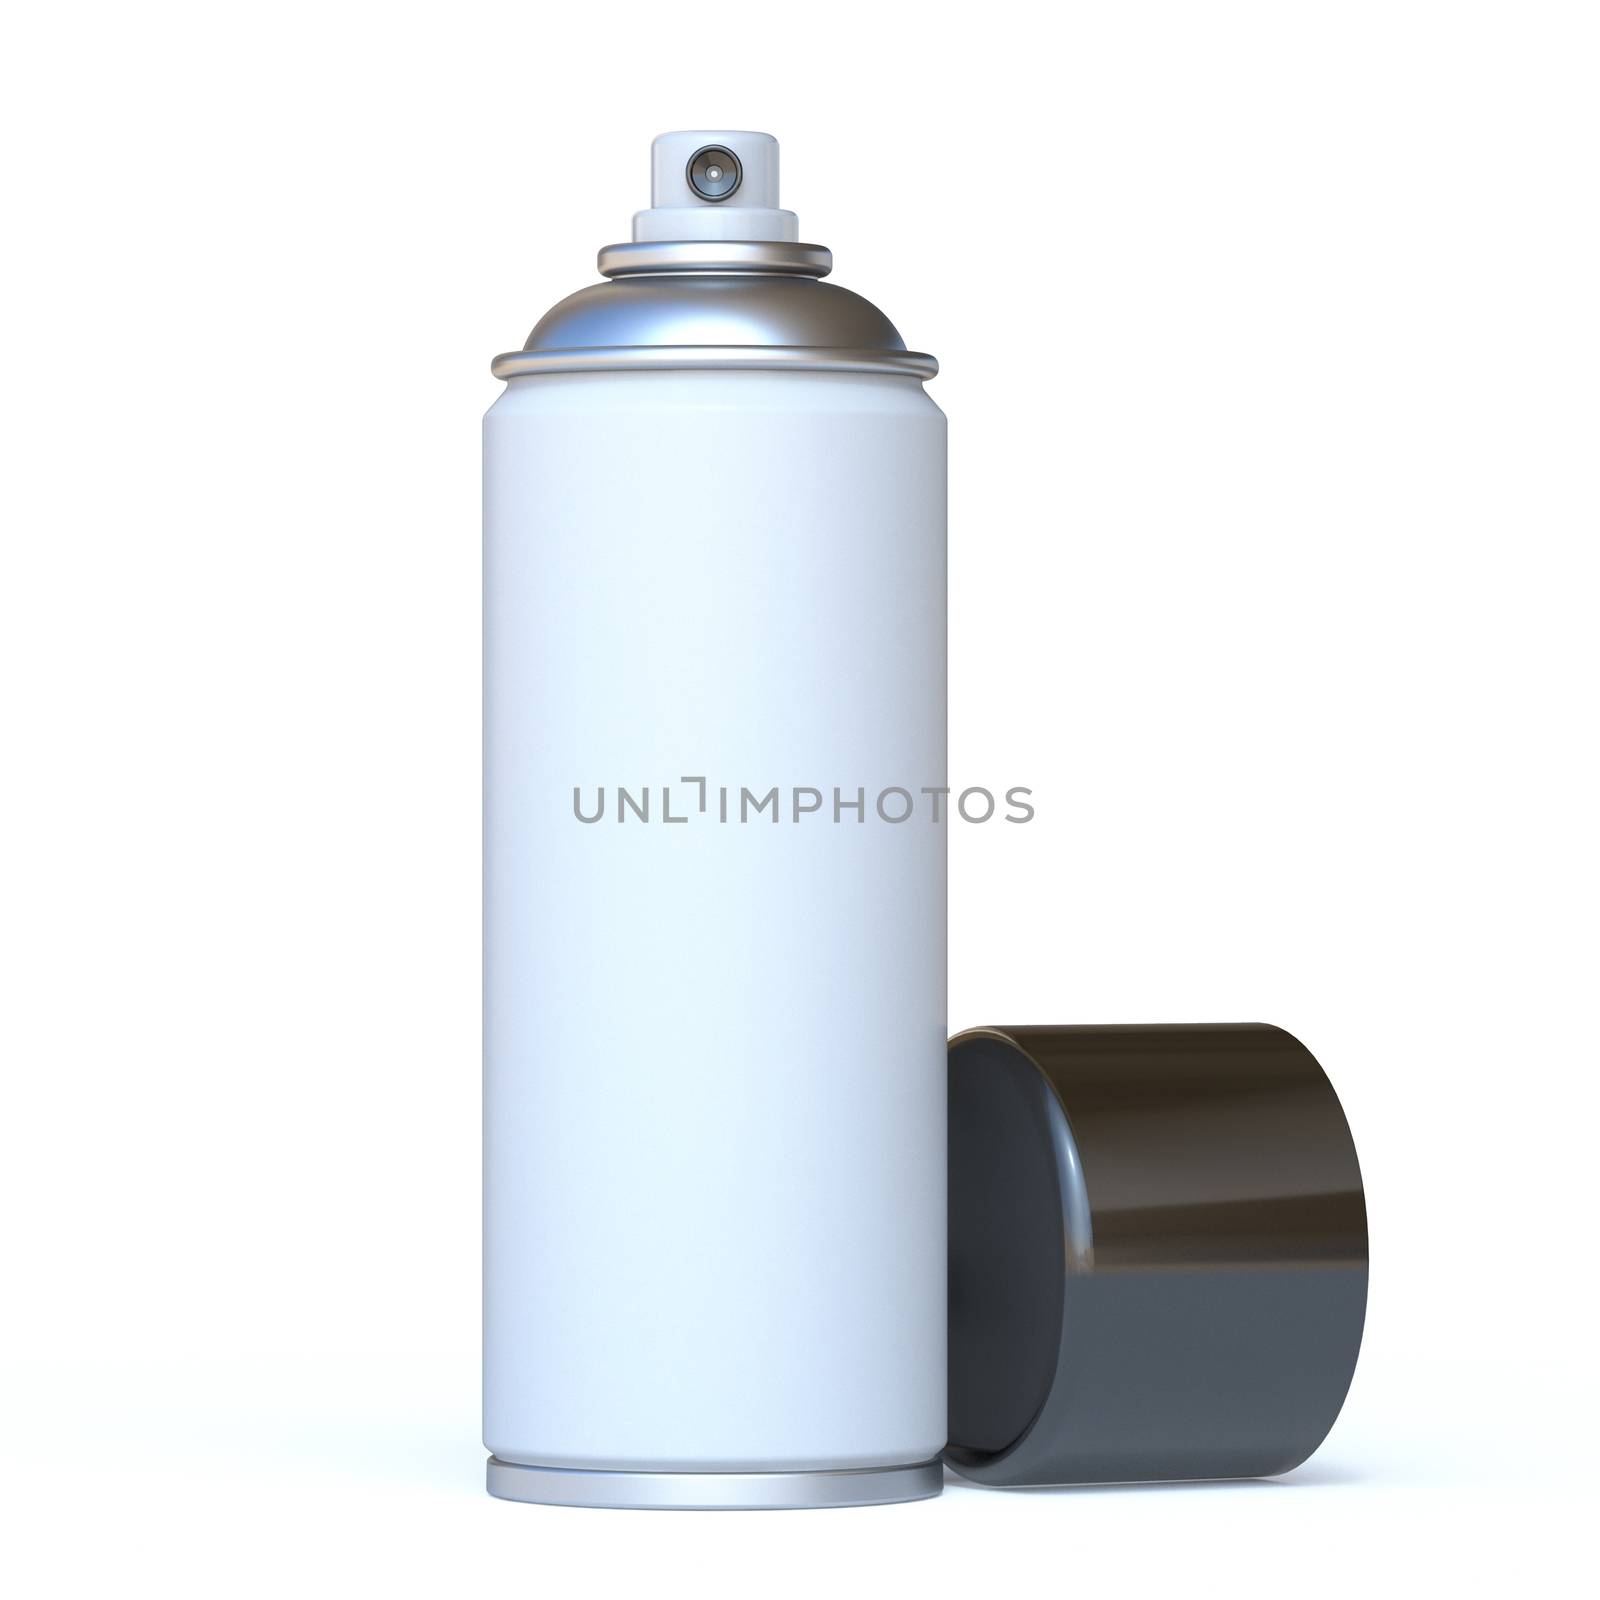 White spray can with black cap 3D render illustration isolated on white background